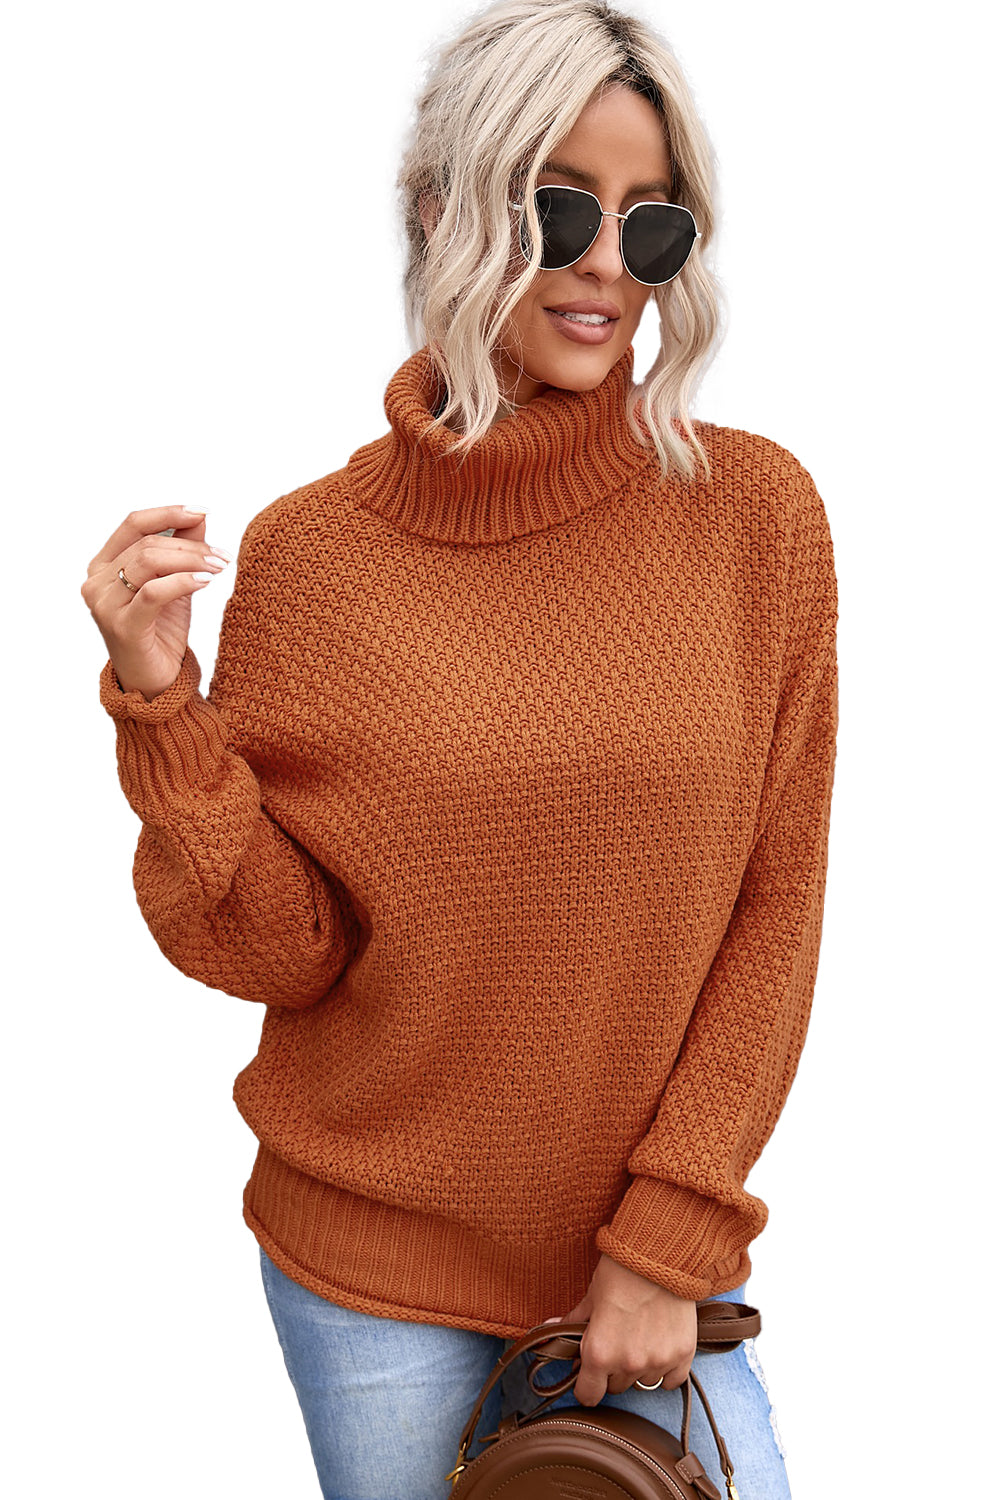 Orange Women's Winter Casual Long Sleeve Turtleneck Solid Color Drop Shoulder Cable Knit Sweater Chunky Sweater LC270200-14